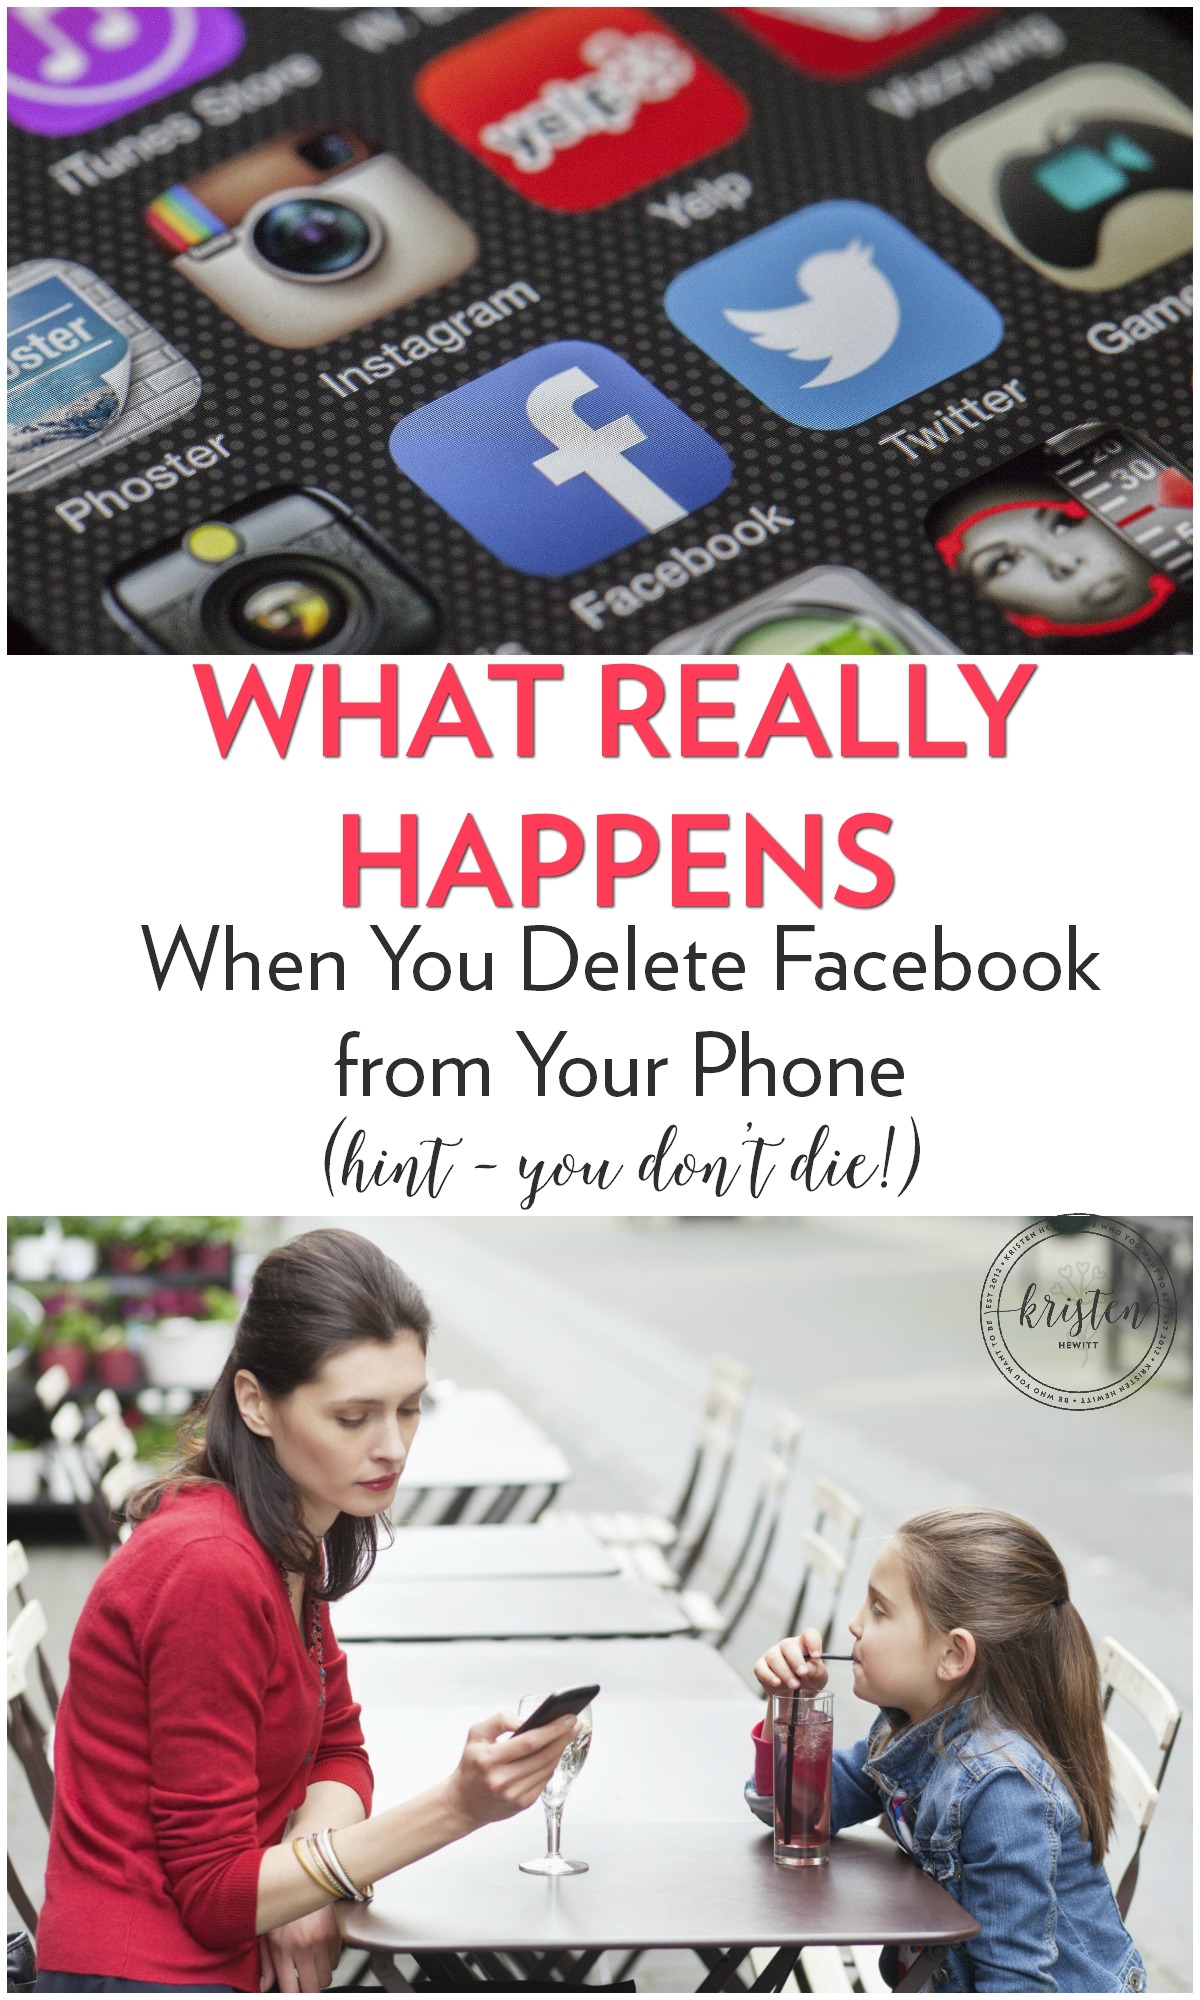 Are you tired of looking down at your phone all the time? Read what happened when one mom deleted Facebook and took back control of her life!